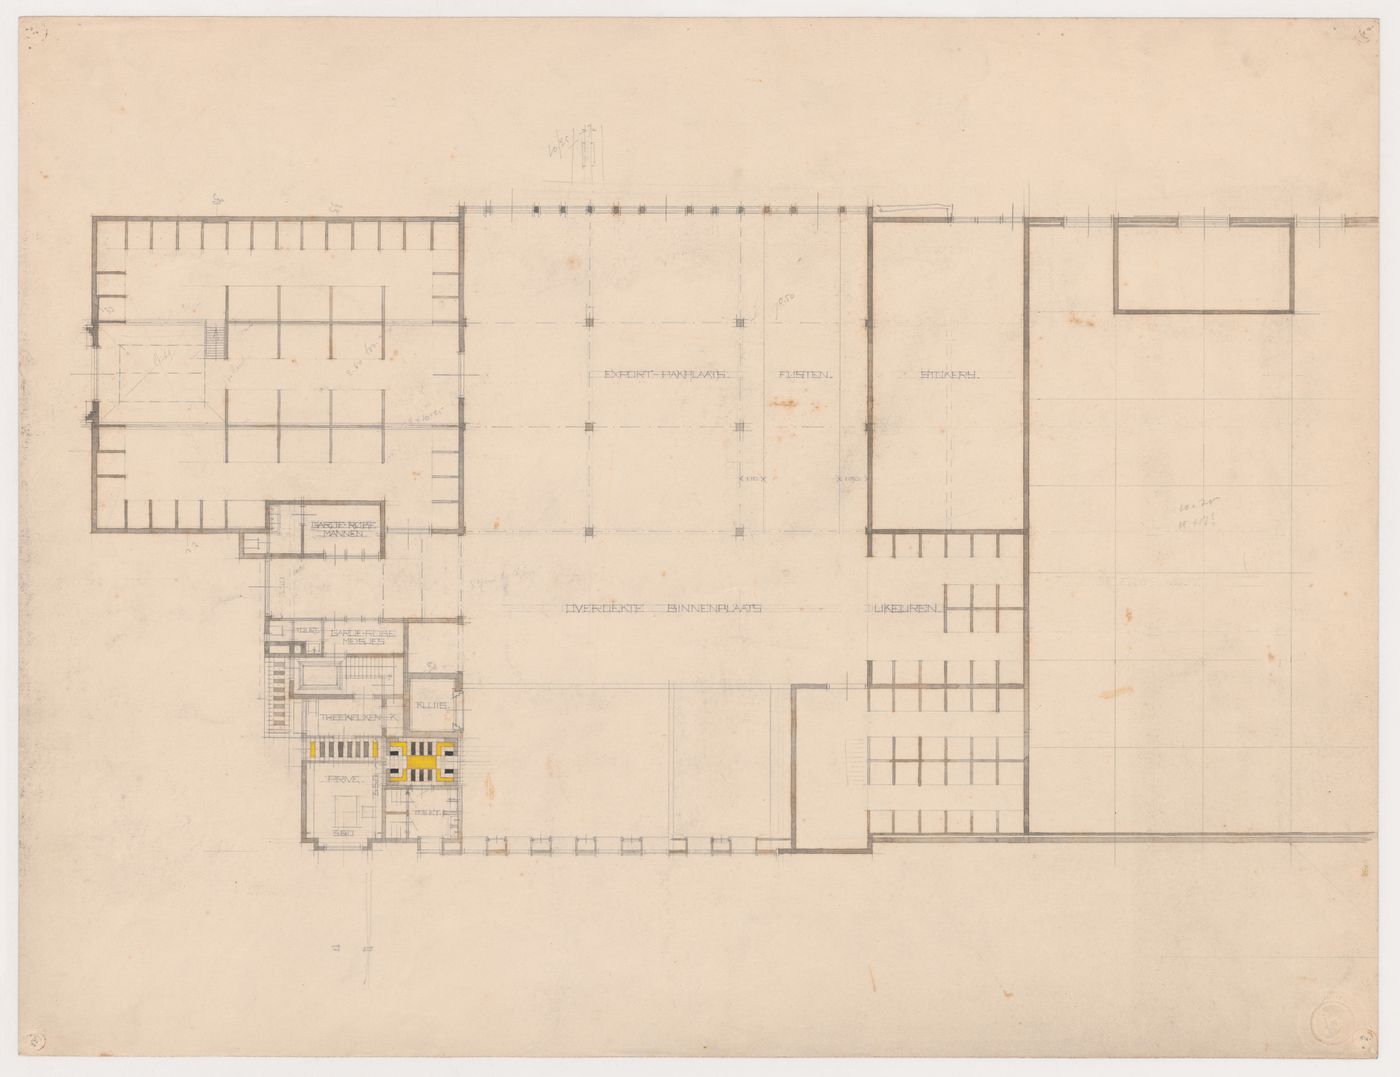 Ground floor plan for a winery, Purmerend, Netherlands